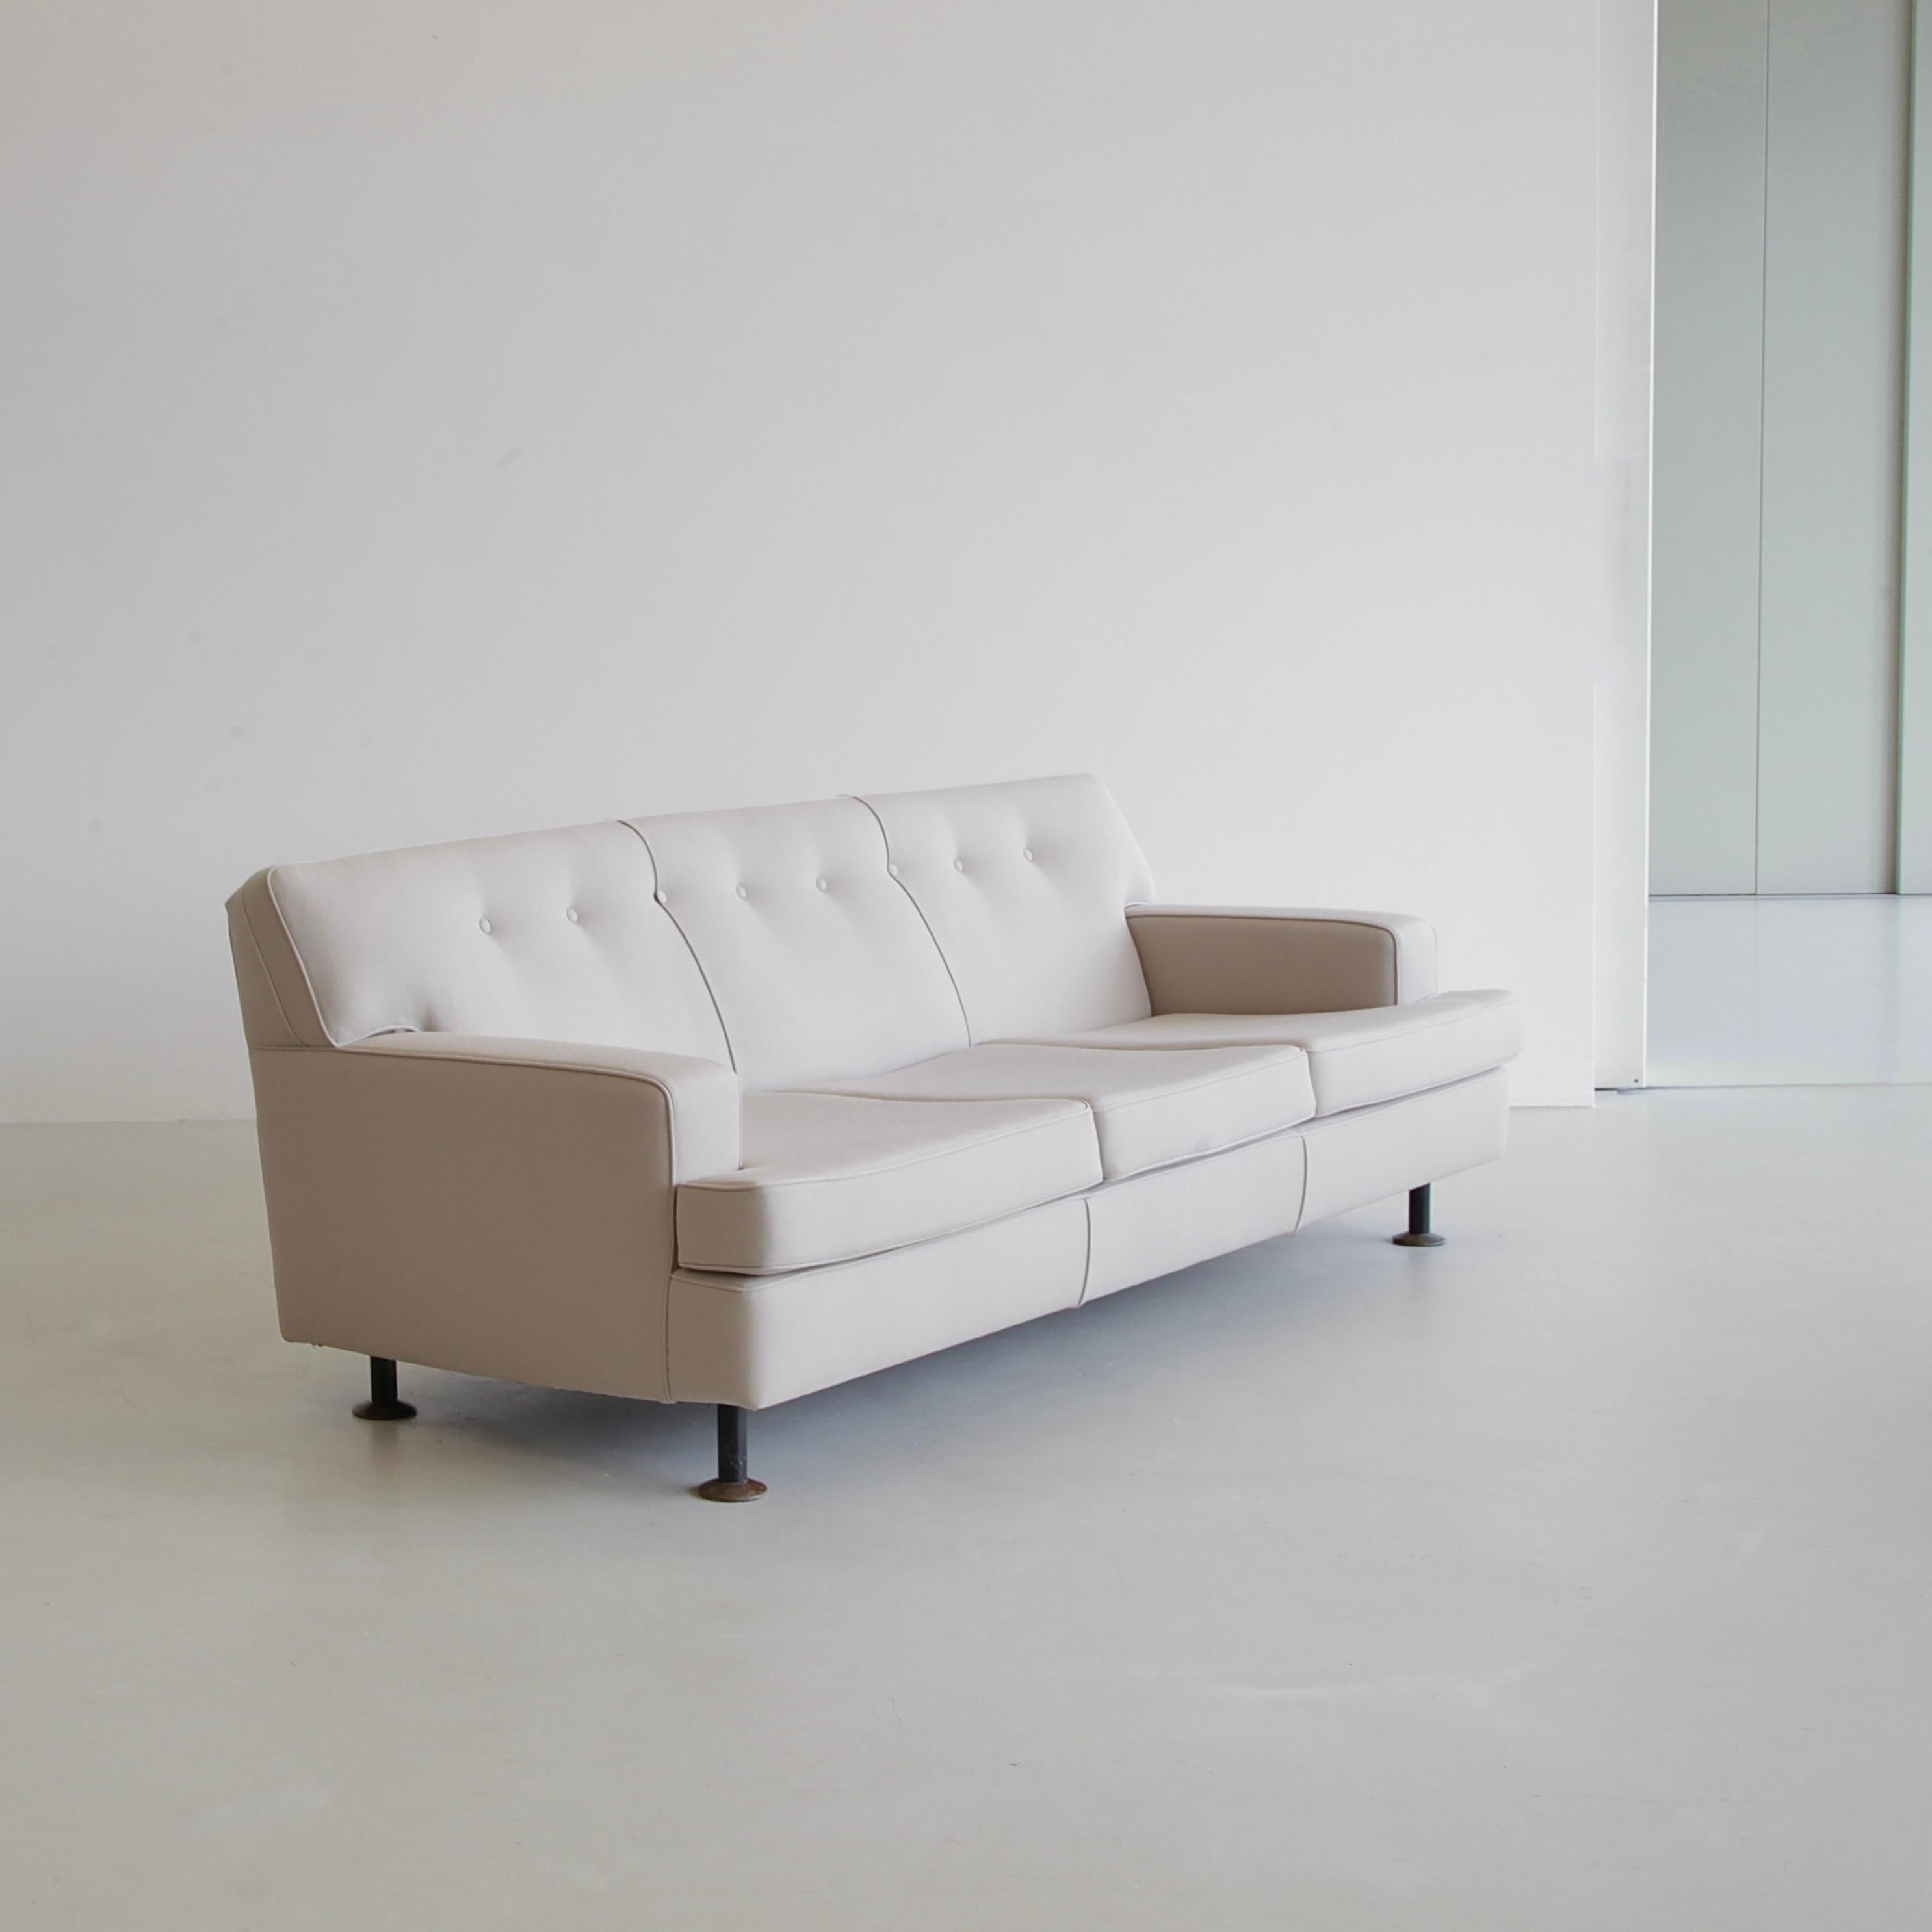 Sofa from the RSQUARE series, designed by Marco Zanuso. Italy, Arflex 1961.

Newly upholstered sofa by Marco Zanuso, with buttoned backrest and three loose seat cushions. Black metal legs with Teak wood feet. Upholstered in KVADRAT